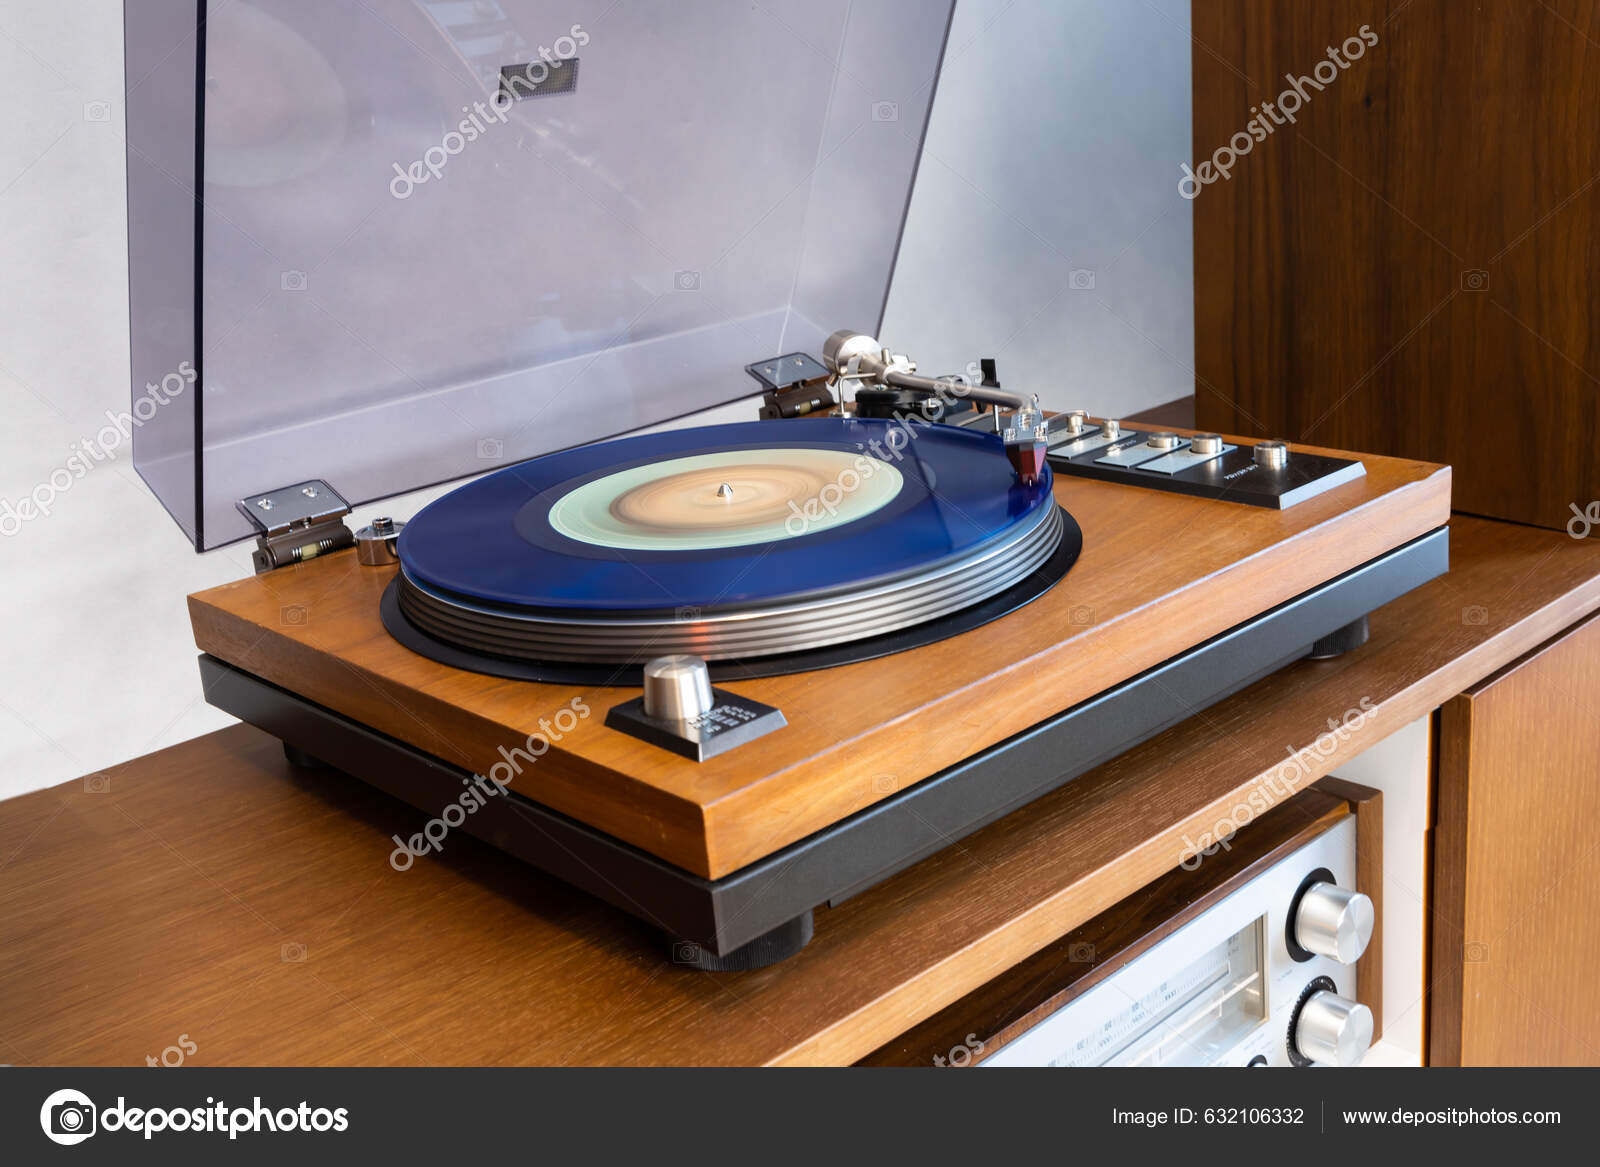 Deck Device Phonograph Player Record Blue and Red Download and Buy